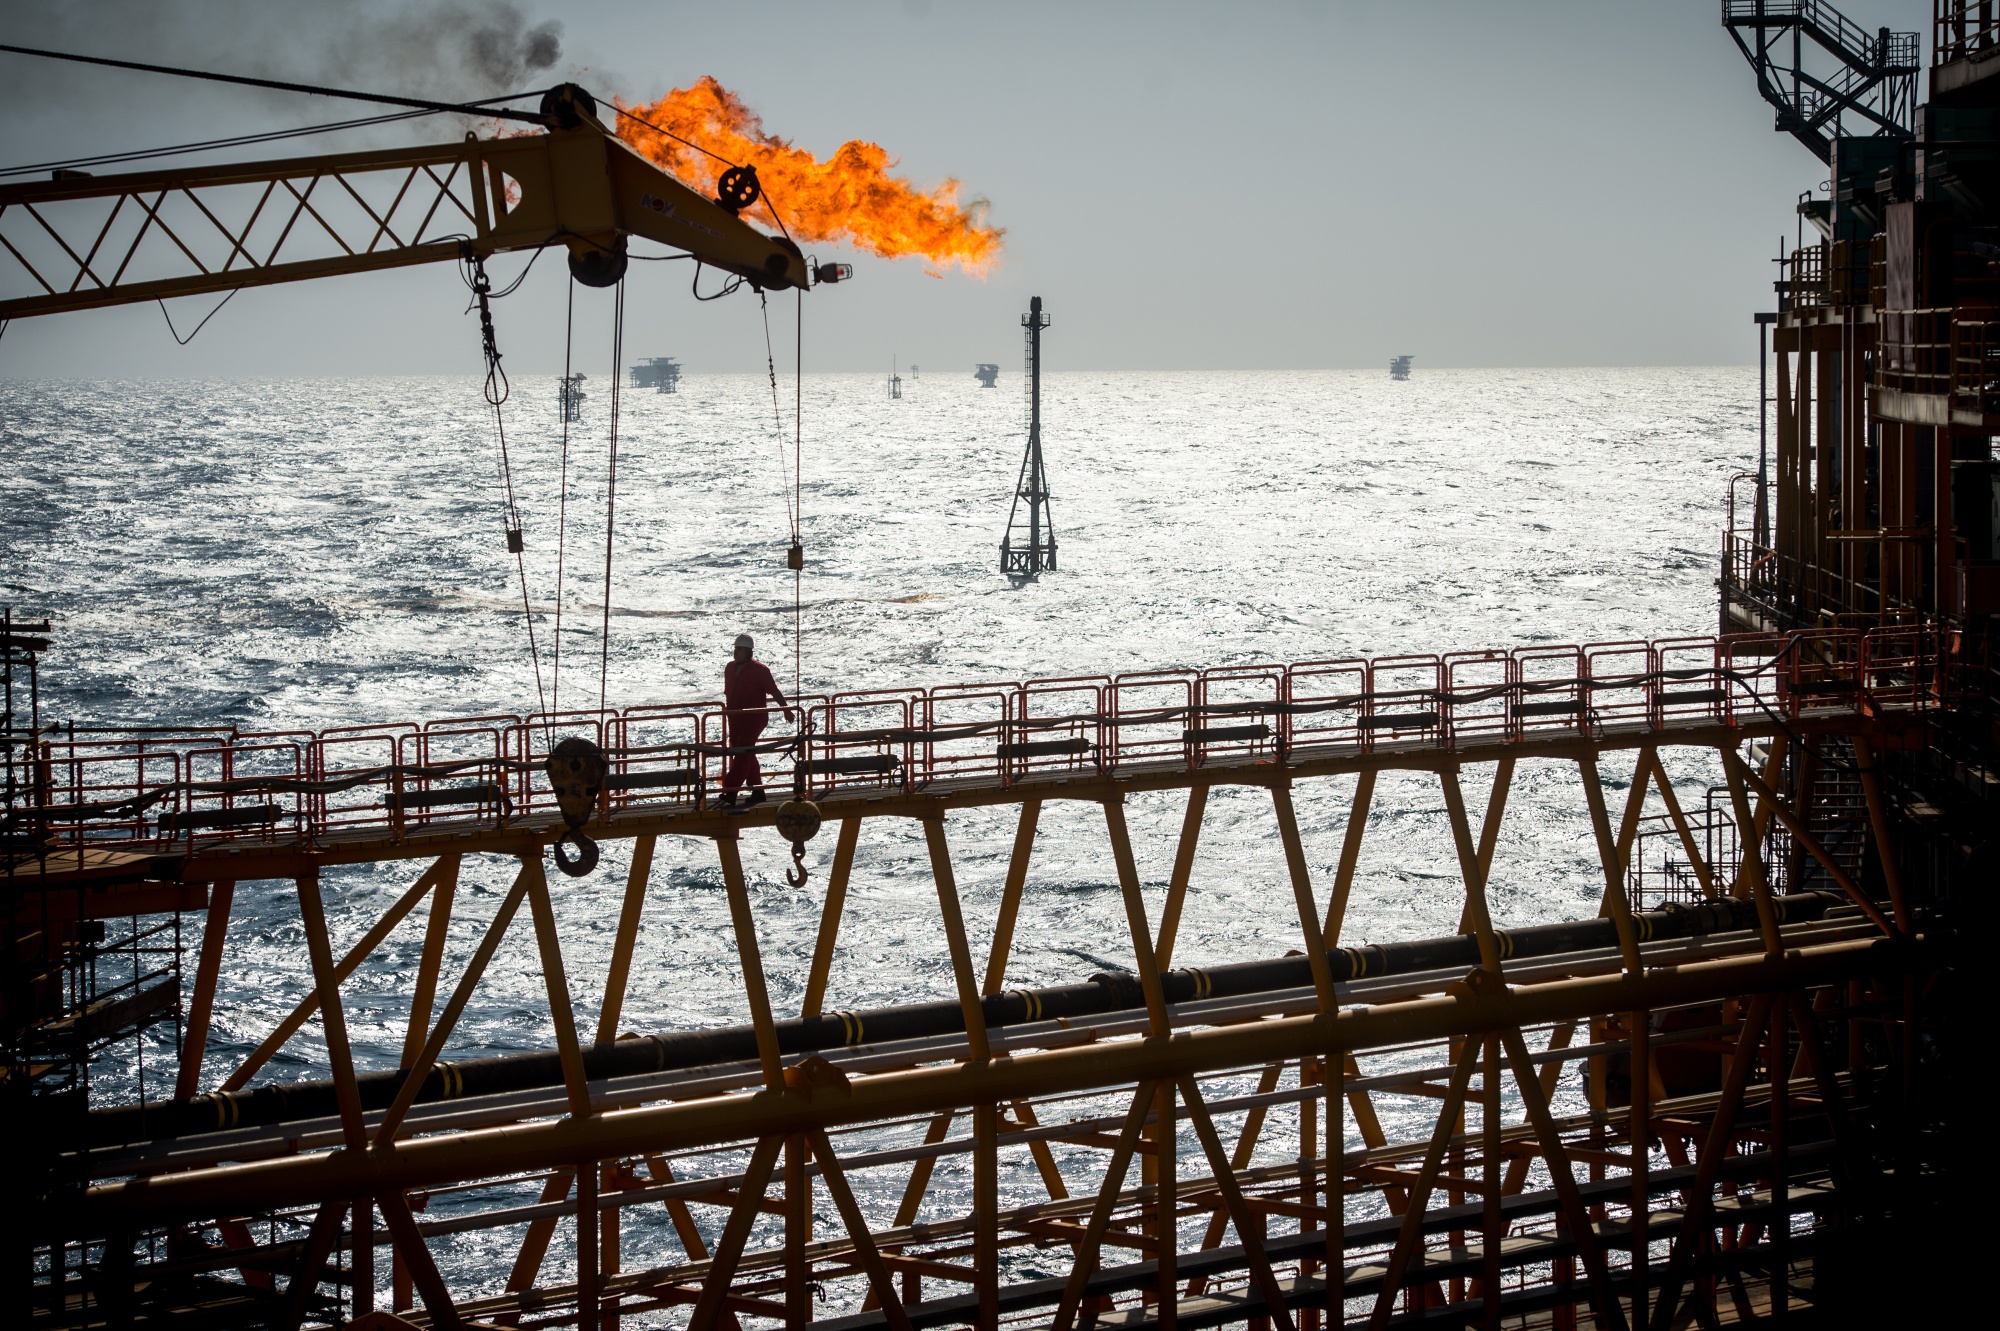 A gas flare burns from a pipe aboard an offshore oil platform in the Persian Gulf's Salman Oil Field, operated by the National Iranian Offshore Oil Co., near Lavan island, Iran, on Thursday, Jan. 5. 2017. Nov. 5 is the day when sweeping U.S. sanctions on Irans energy and banking sectors go back into effect after Trumps decision in May to walk away from the six-nation deal with Iran that suspended them. Photographer: Ali Mohammadi/Bloomberg